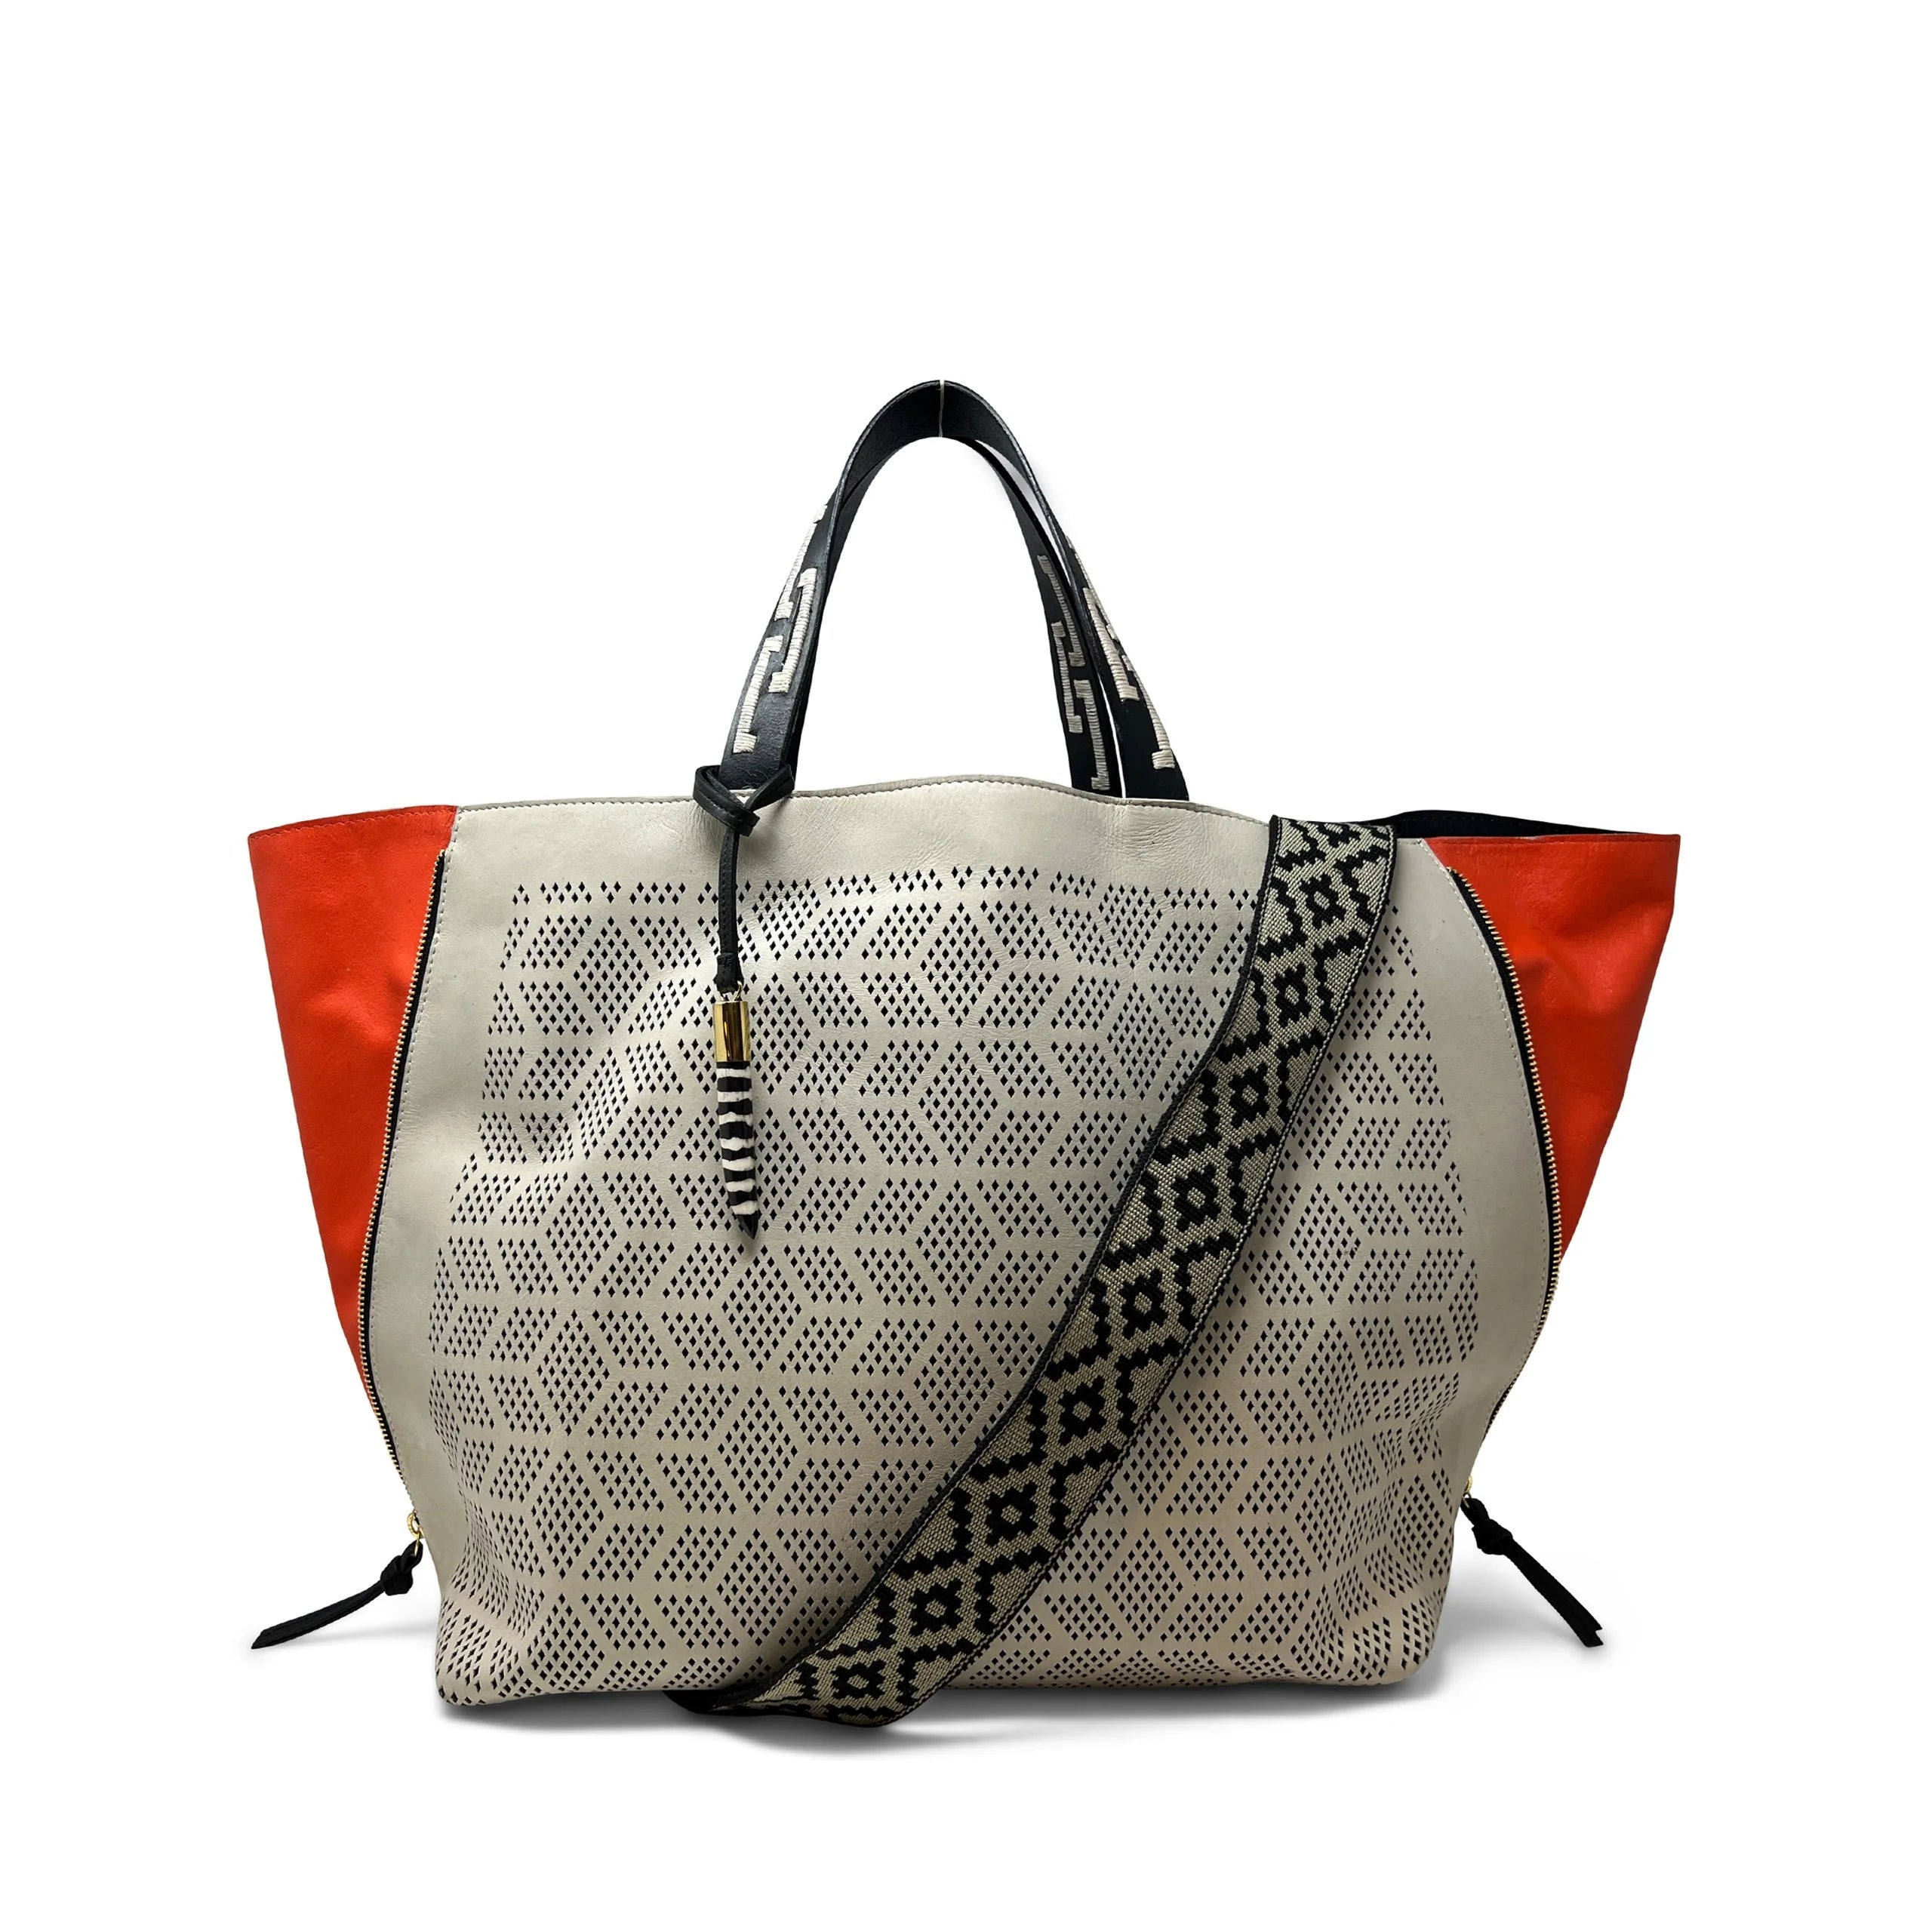 Bantham Tote - Chalk Double Diamond Perforated